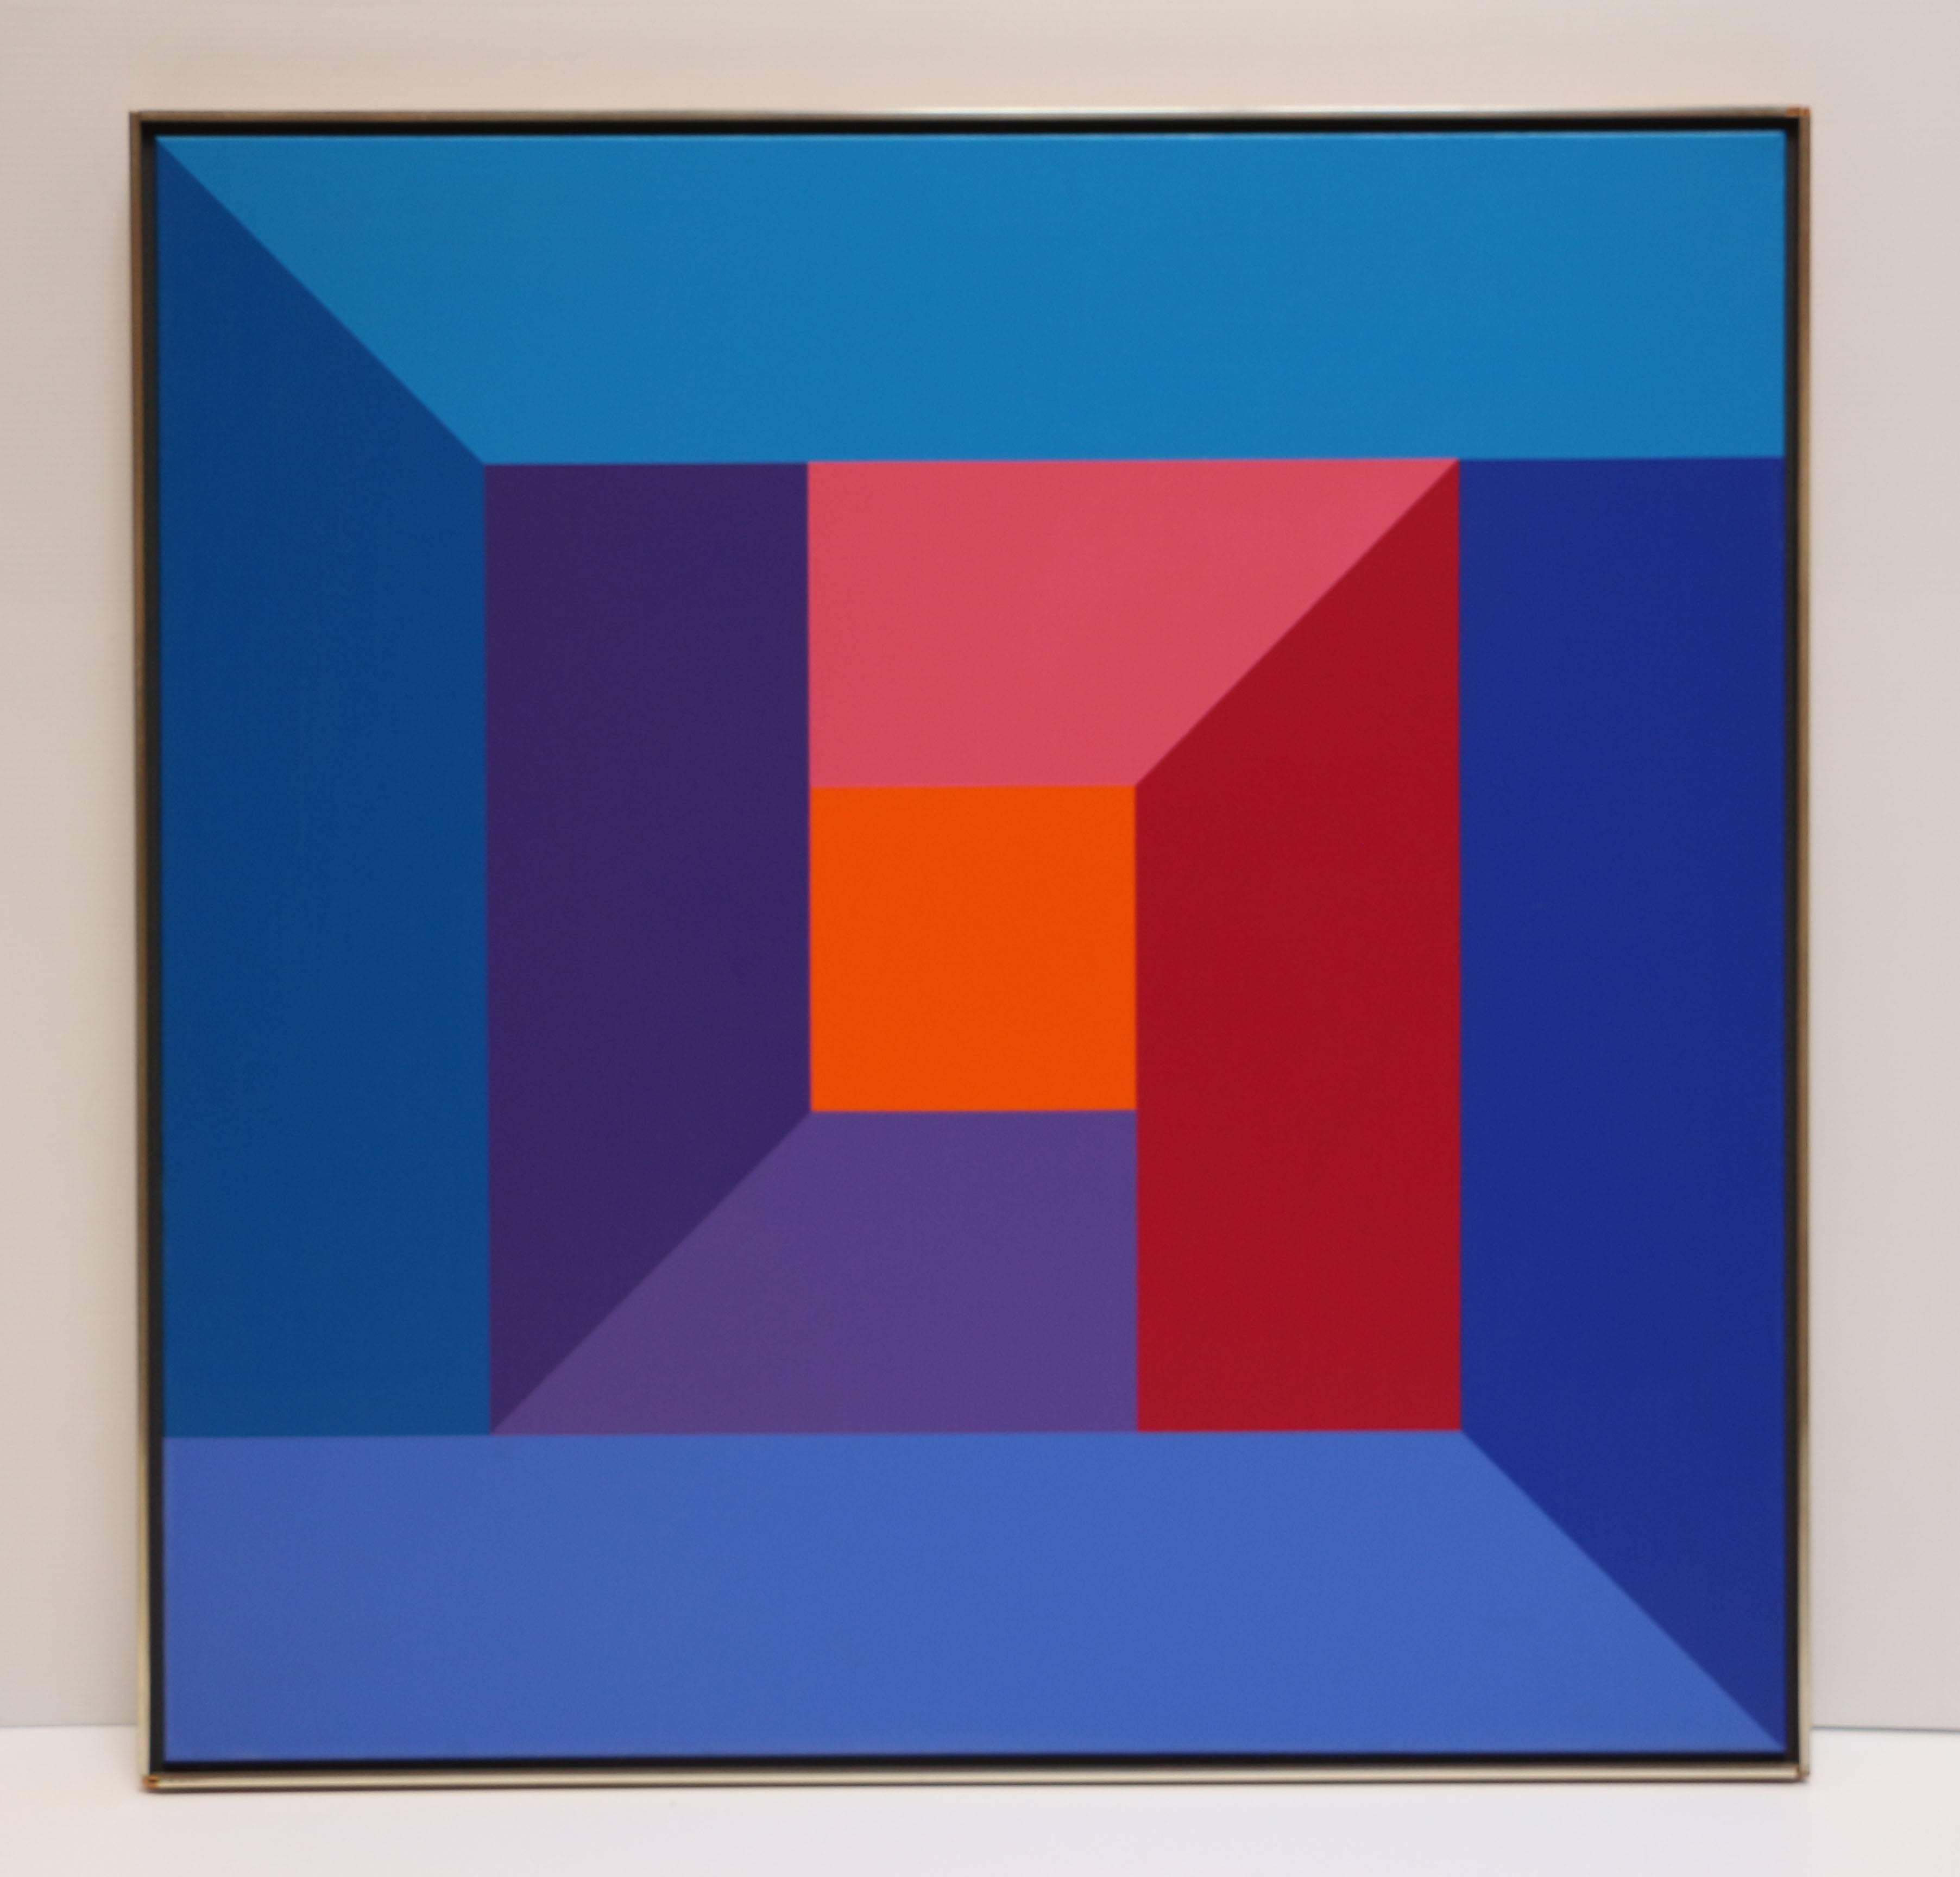 #7, original oil painting with blue, purple, red, pink and orange color squares  - Painting by Karl Benjamin